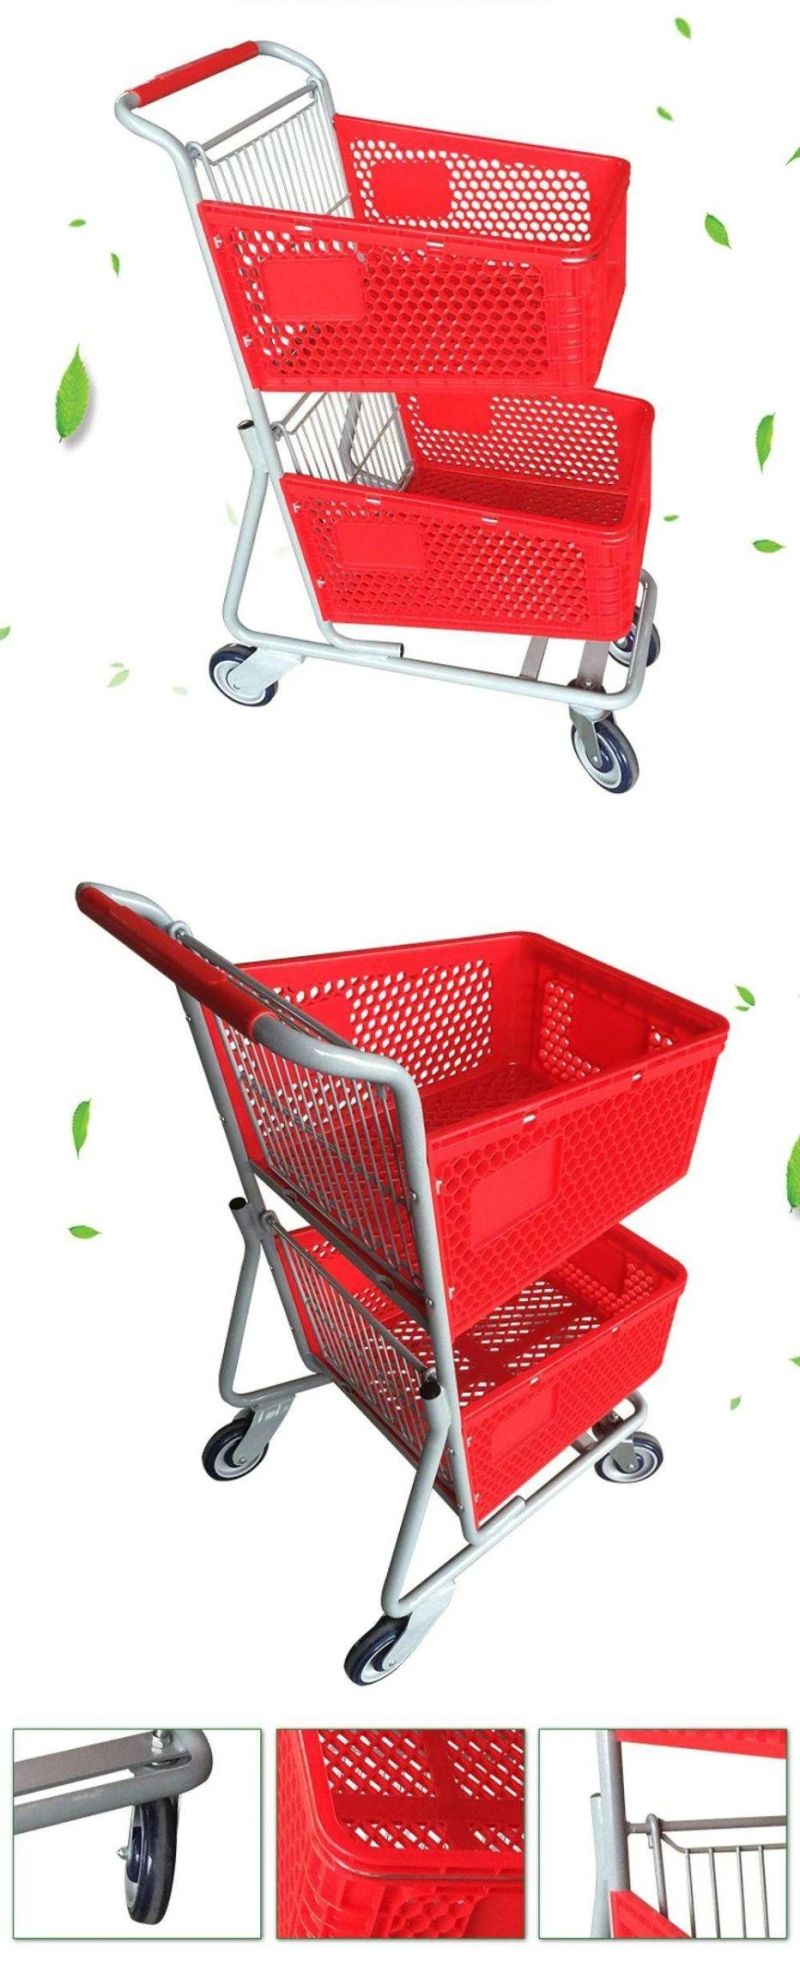 Large Capacity Great Quality Hypermarket Double Basket Cart Shopping Trolley